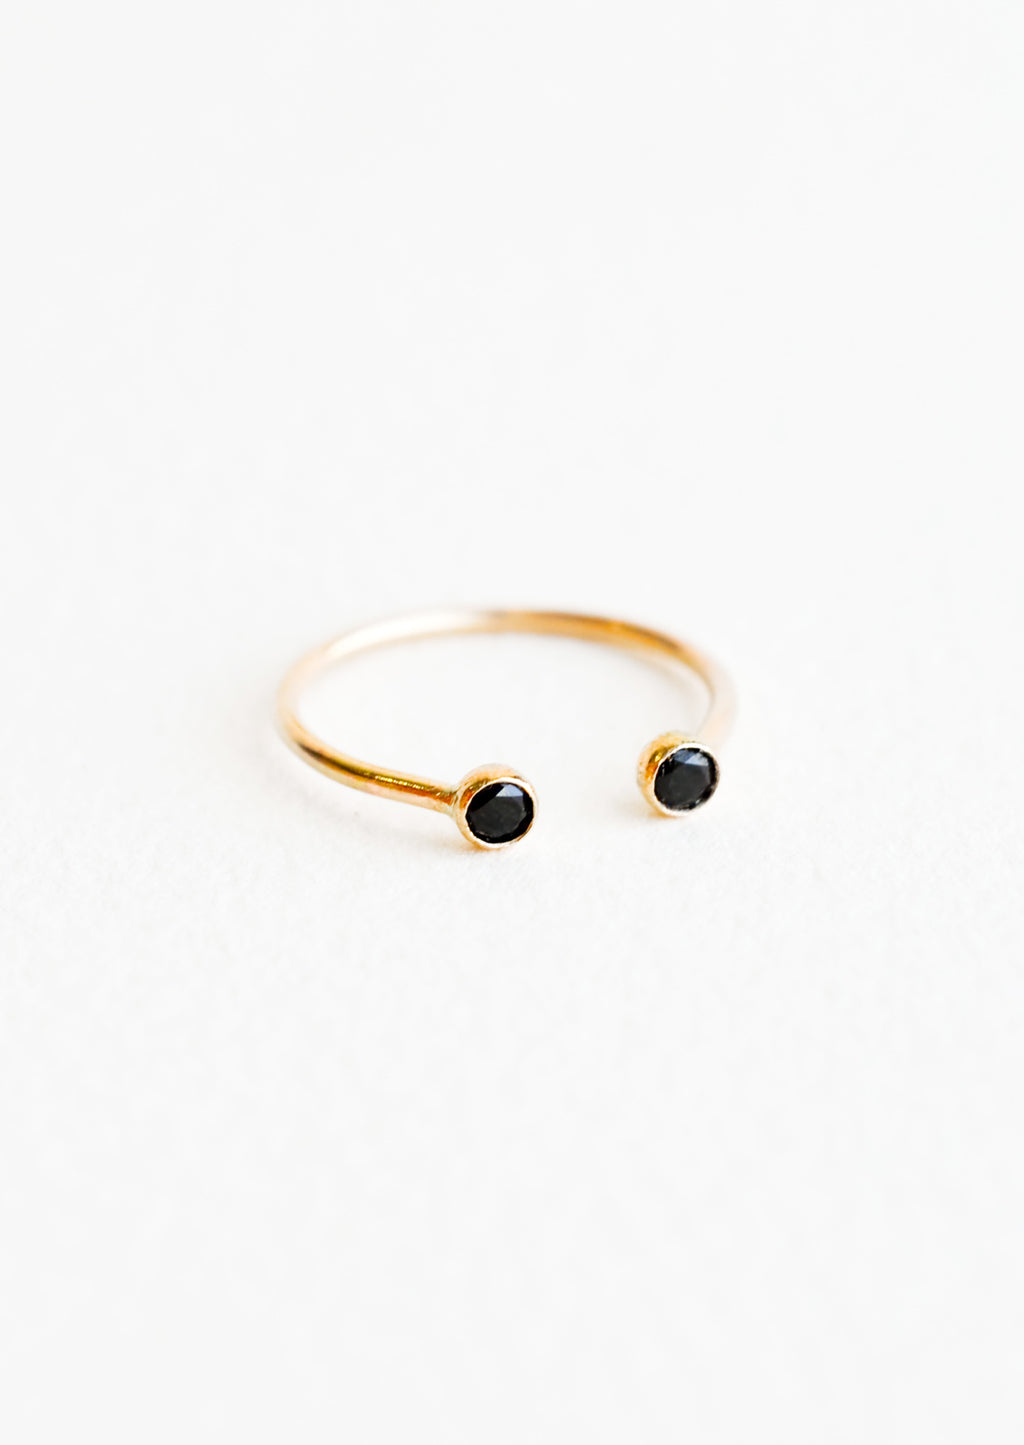 Black Spinel / Size 6: Yellow gold adjustable ring with opening at front and a black stone on each side of the opening.